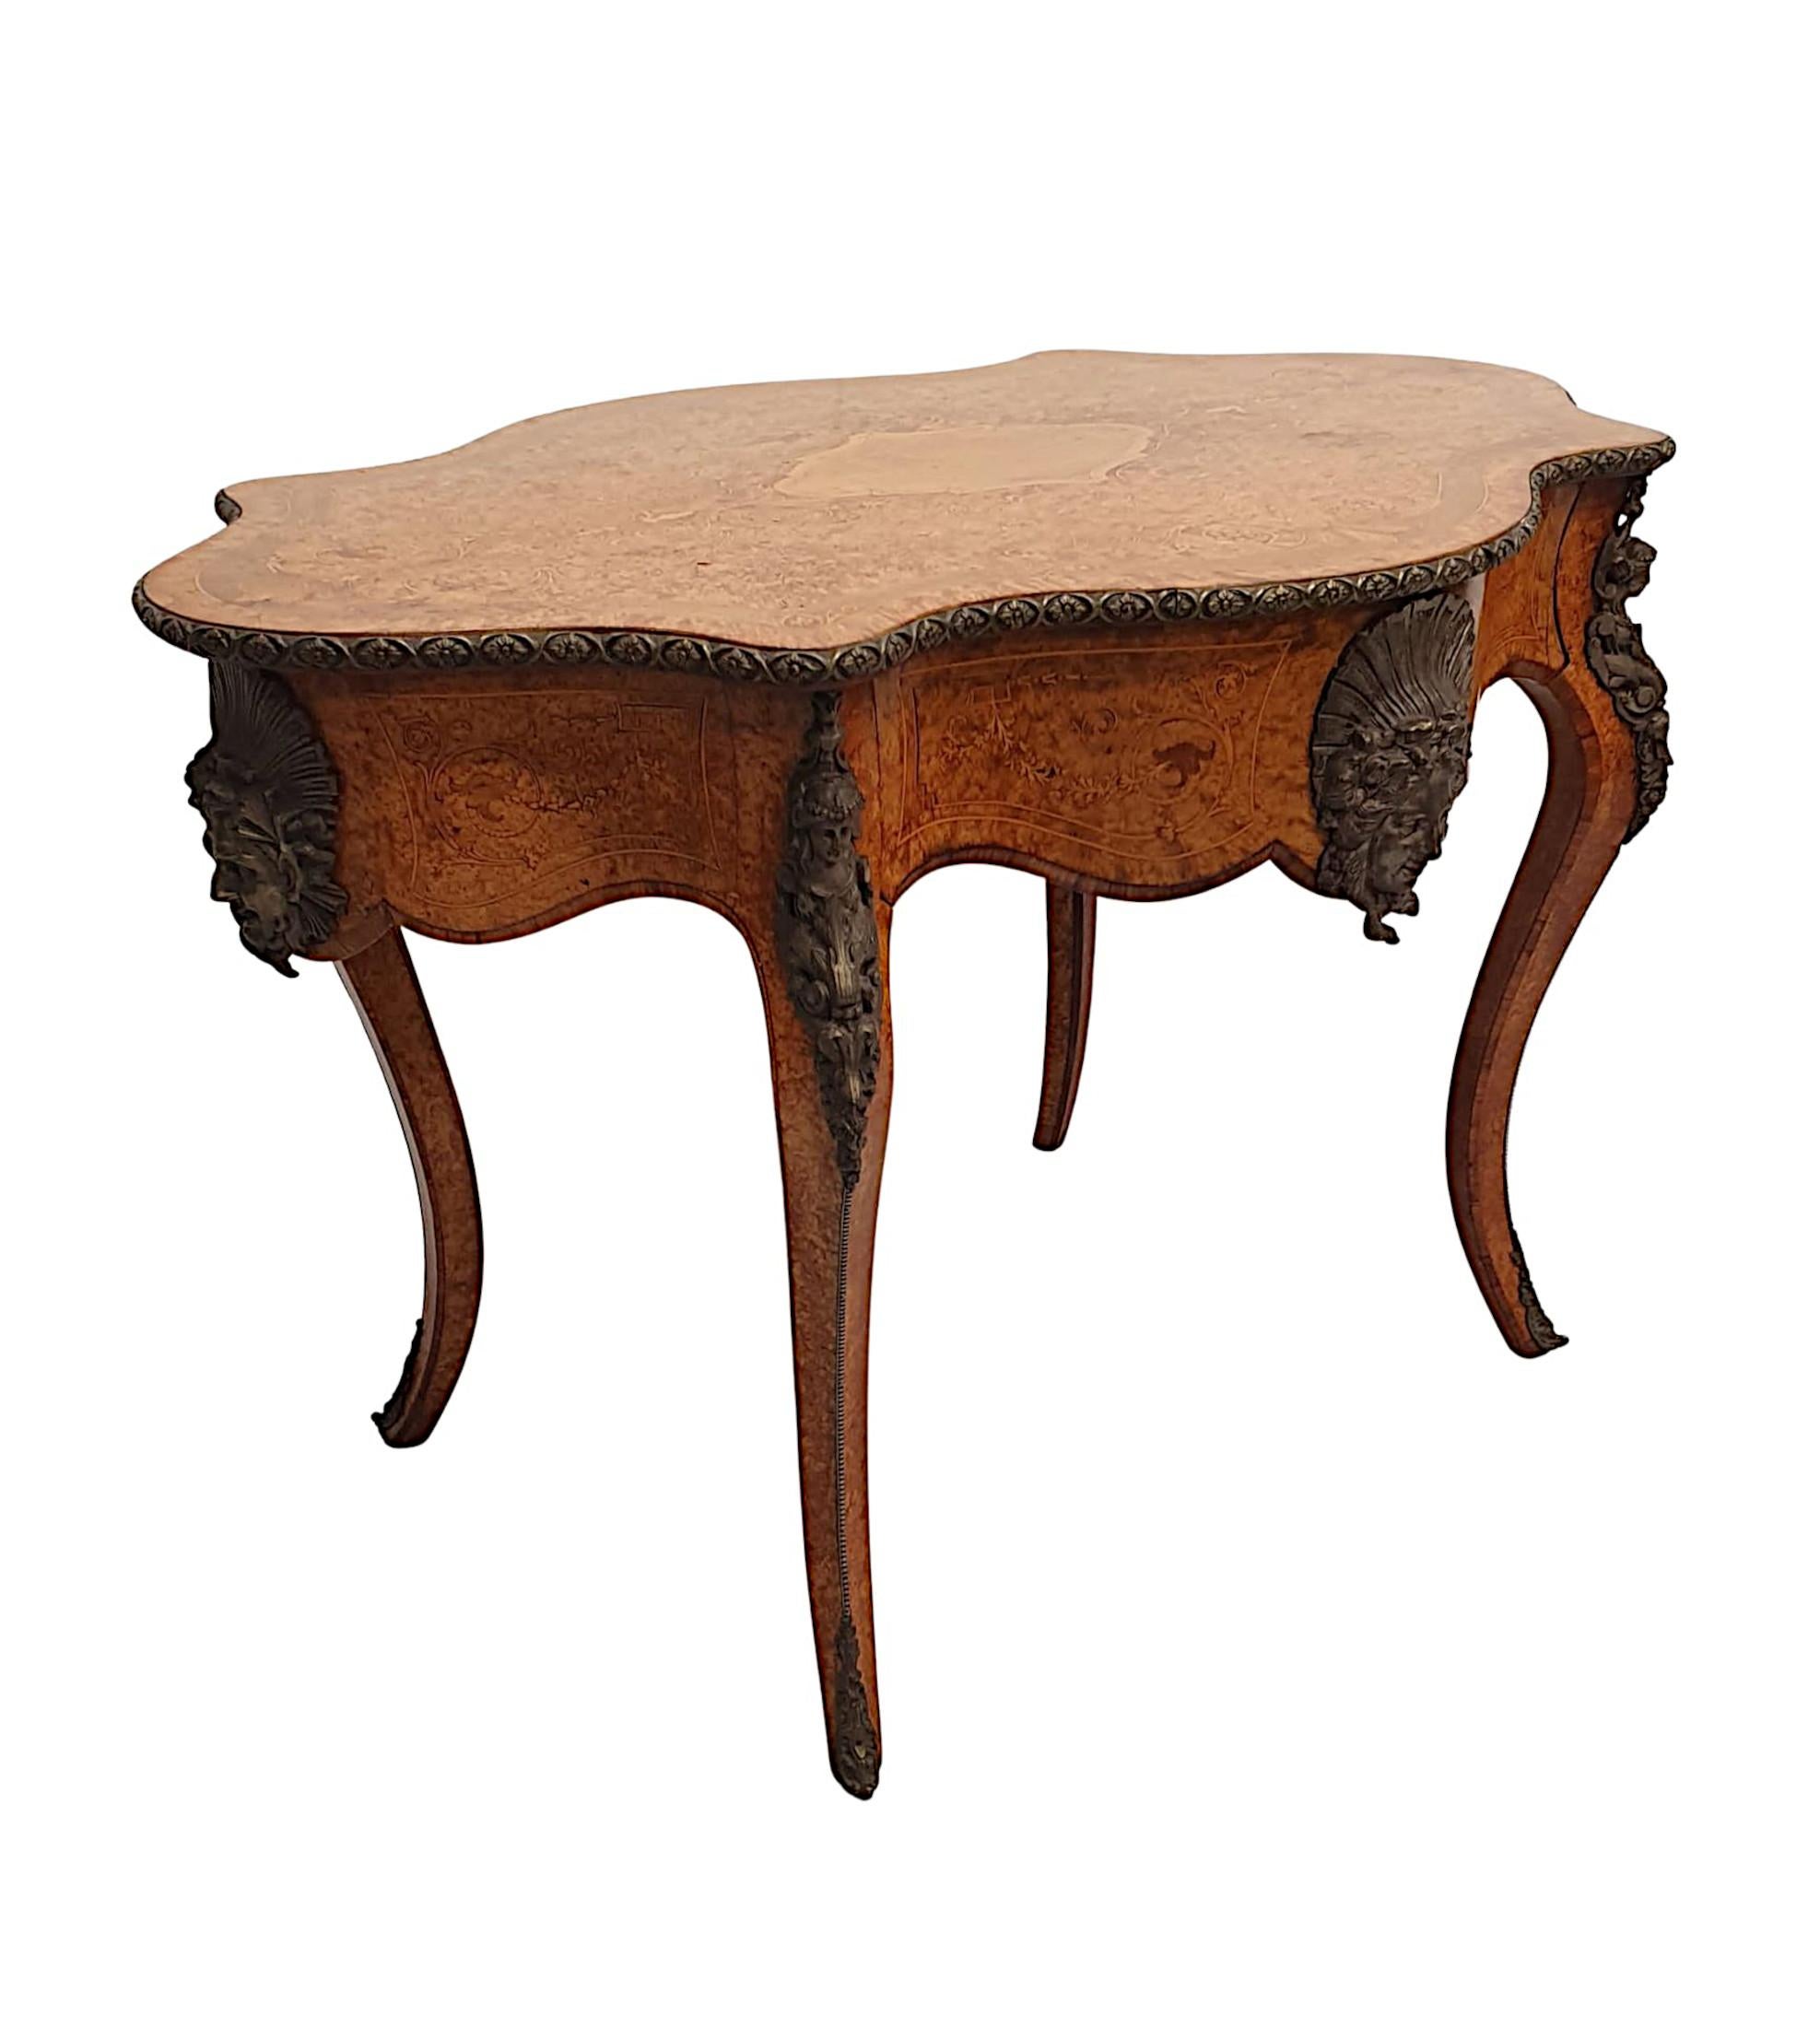 A very fine 19th century marquetry inlaid bird’s-eye maple desk or library centre table, finely carved, ormolu mounted, line inlaid and cross banded throughout and of gorgeous quality with beautifully rich patination and fine grain. The moulded,